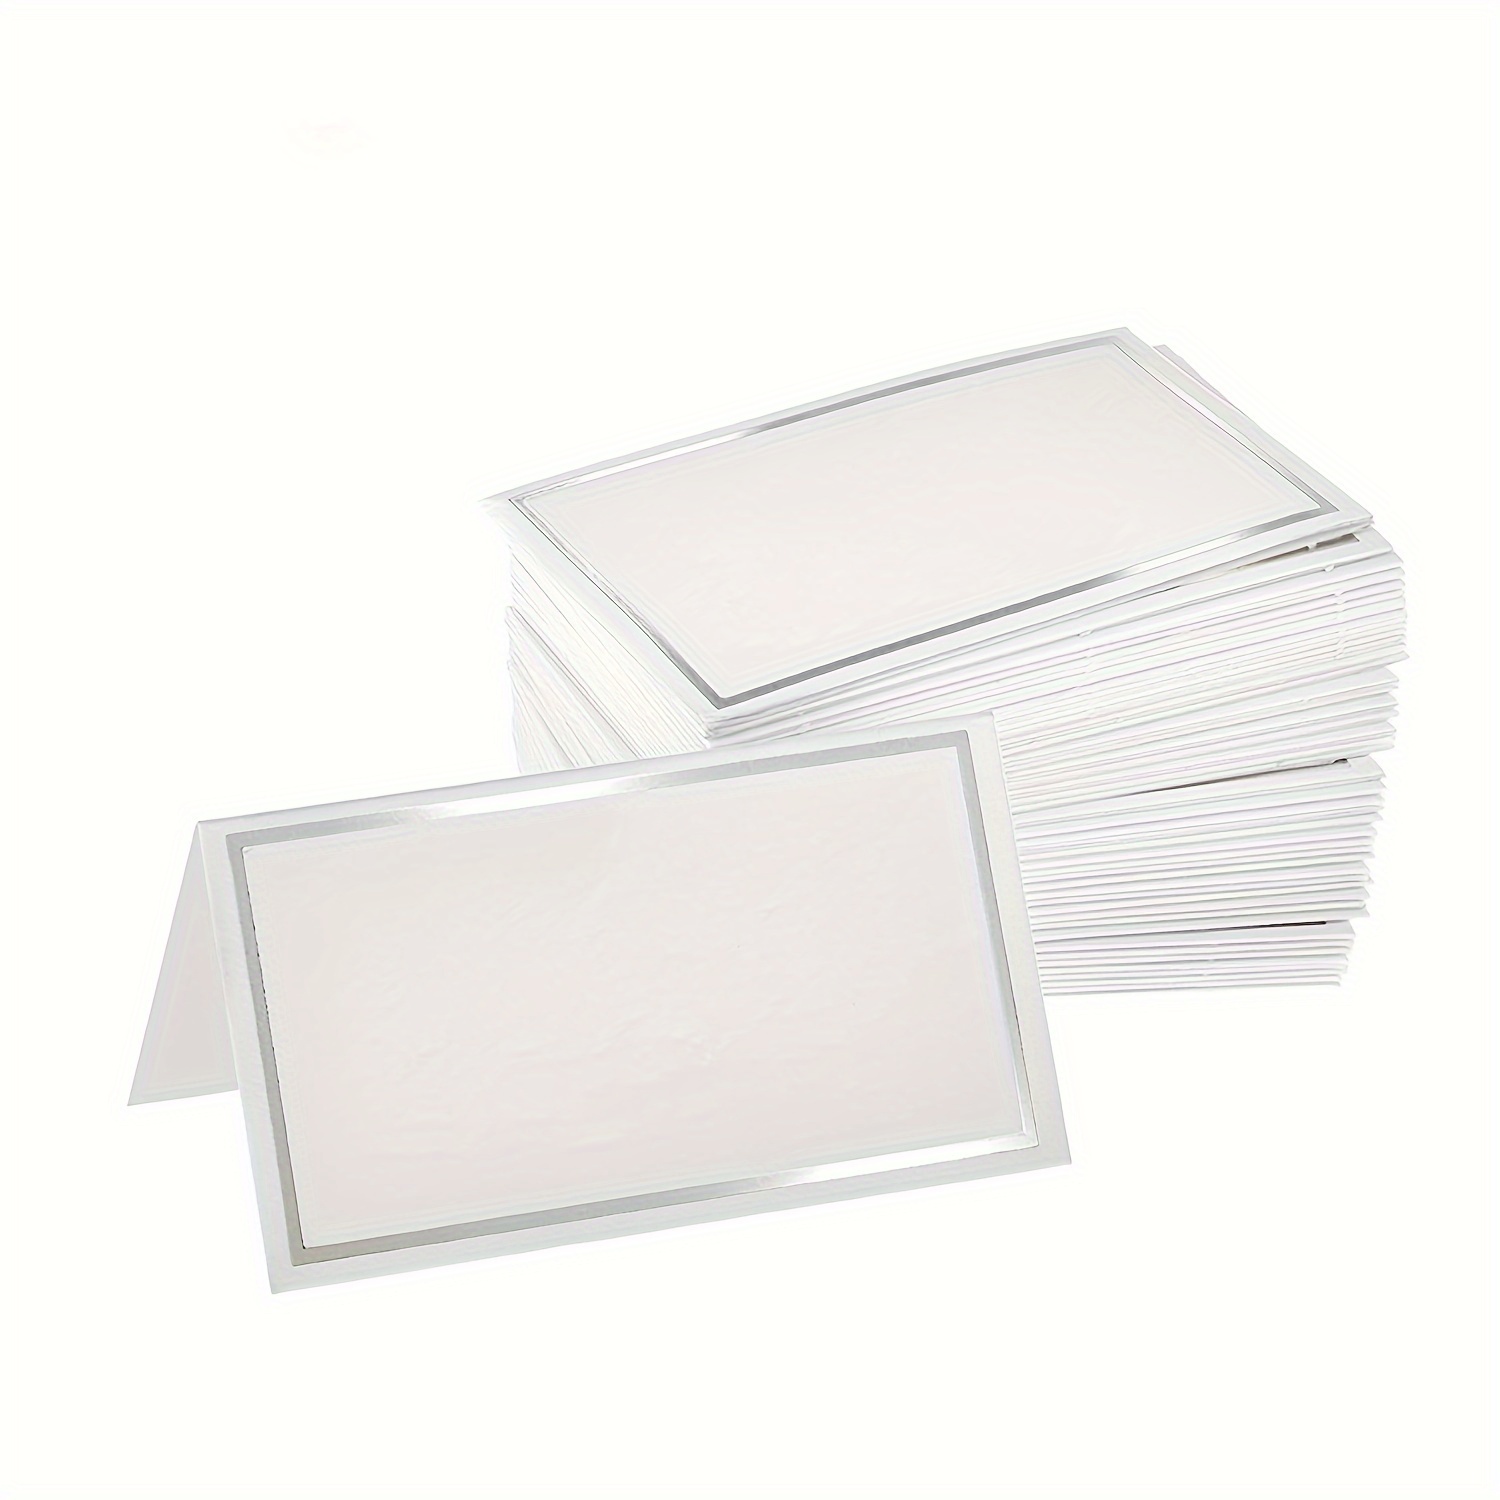 

30/50pcs, Seat Cards Place Cards Delicate Seating Cards With Silvery Foil Border, Blank Name Cards For Weddings Party Wedding Supplies Dinner Parties Place Cards